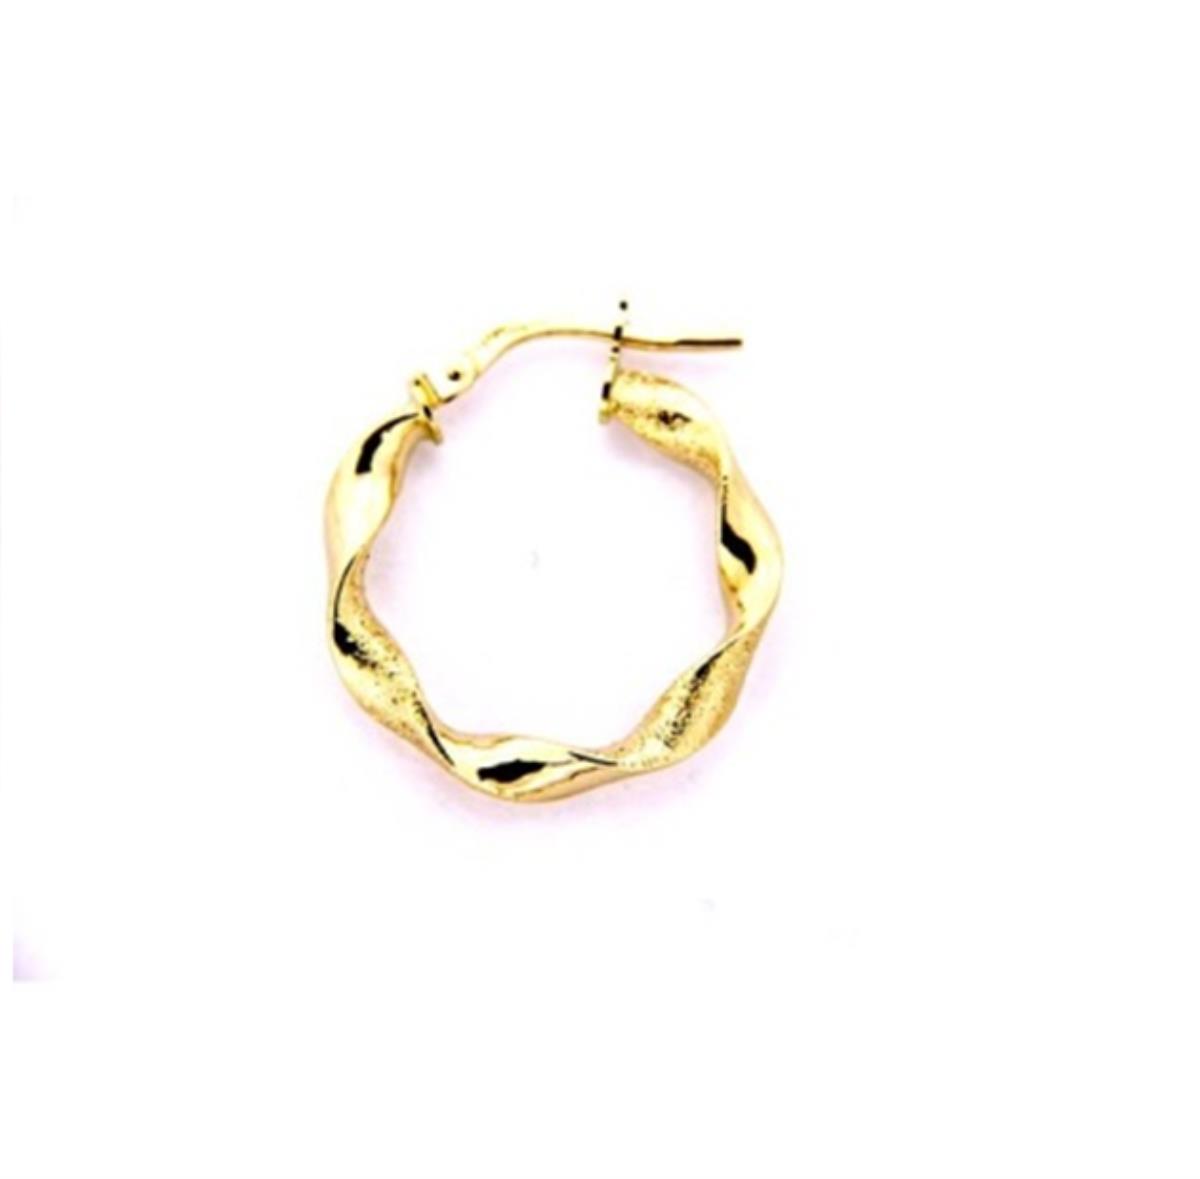 14K Yellow Gold Alternating Polished & Textured Twisted Hoop Earring